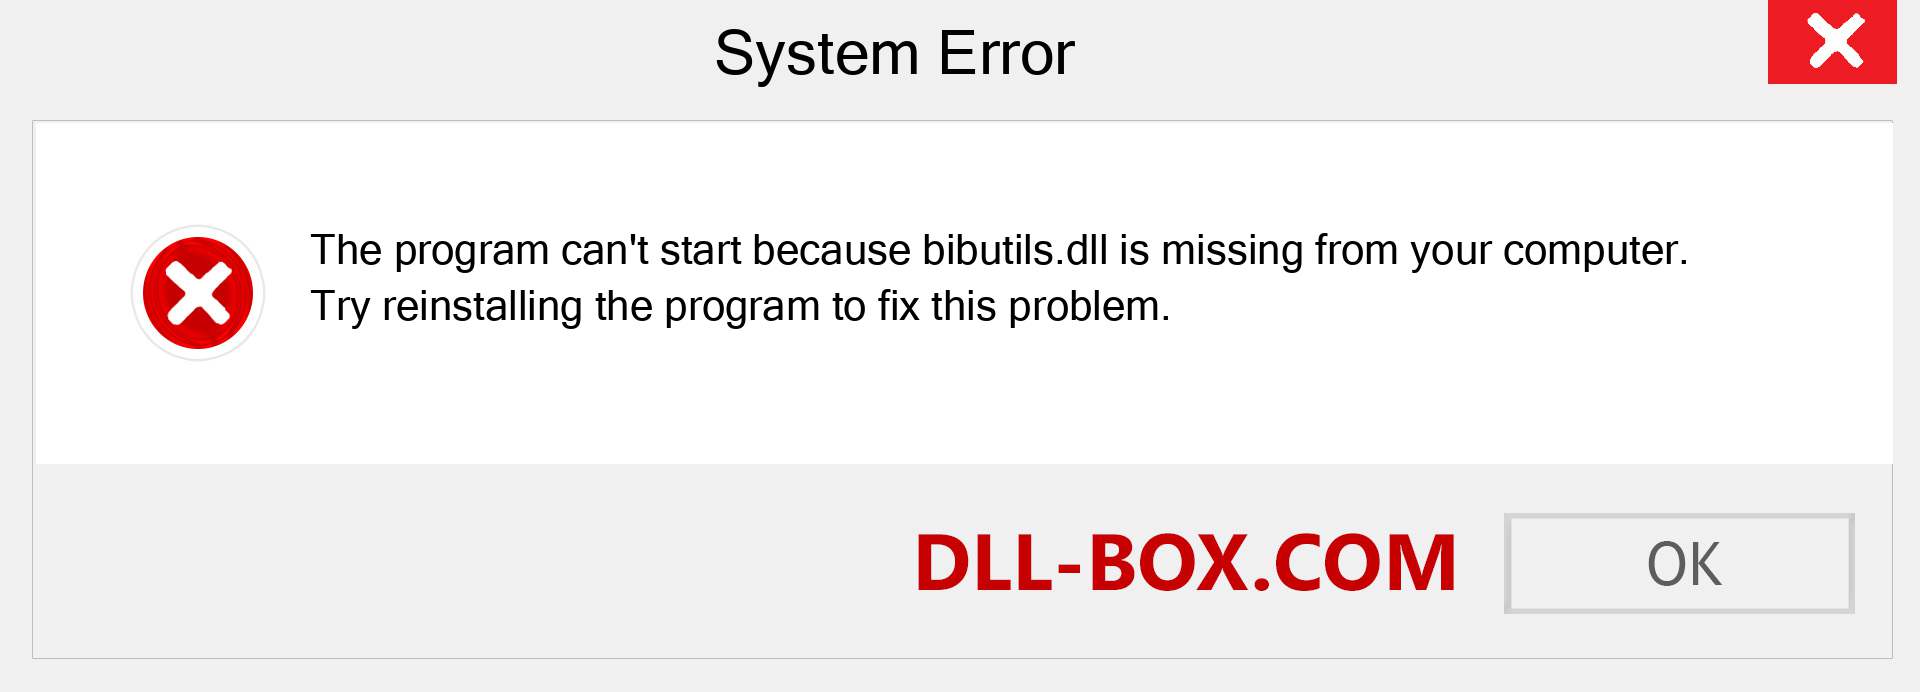  bibutils.dll file is missing?. Download for Windows 7, 8, 10 - Fix  bibutils dll Missing Error on Windows, photos, images